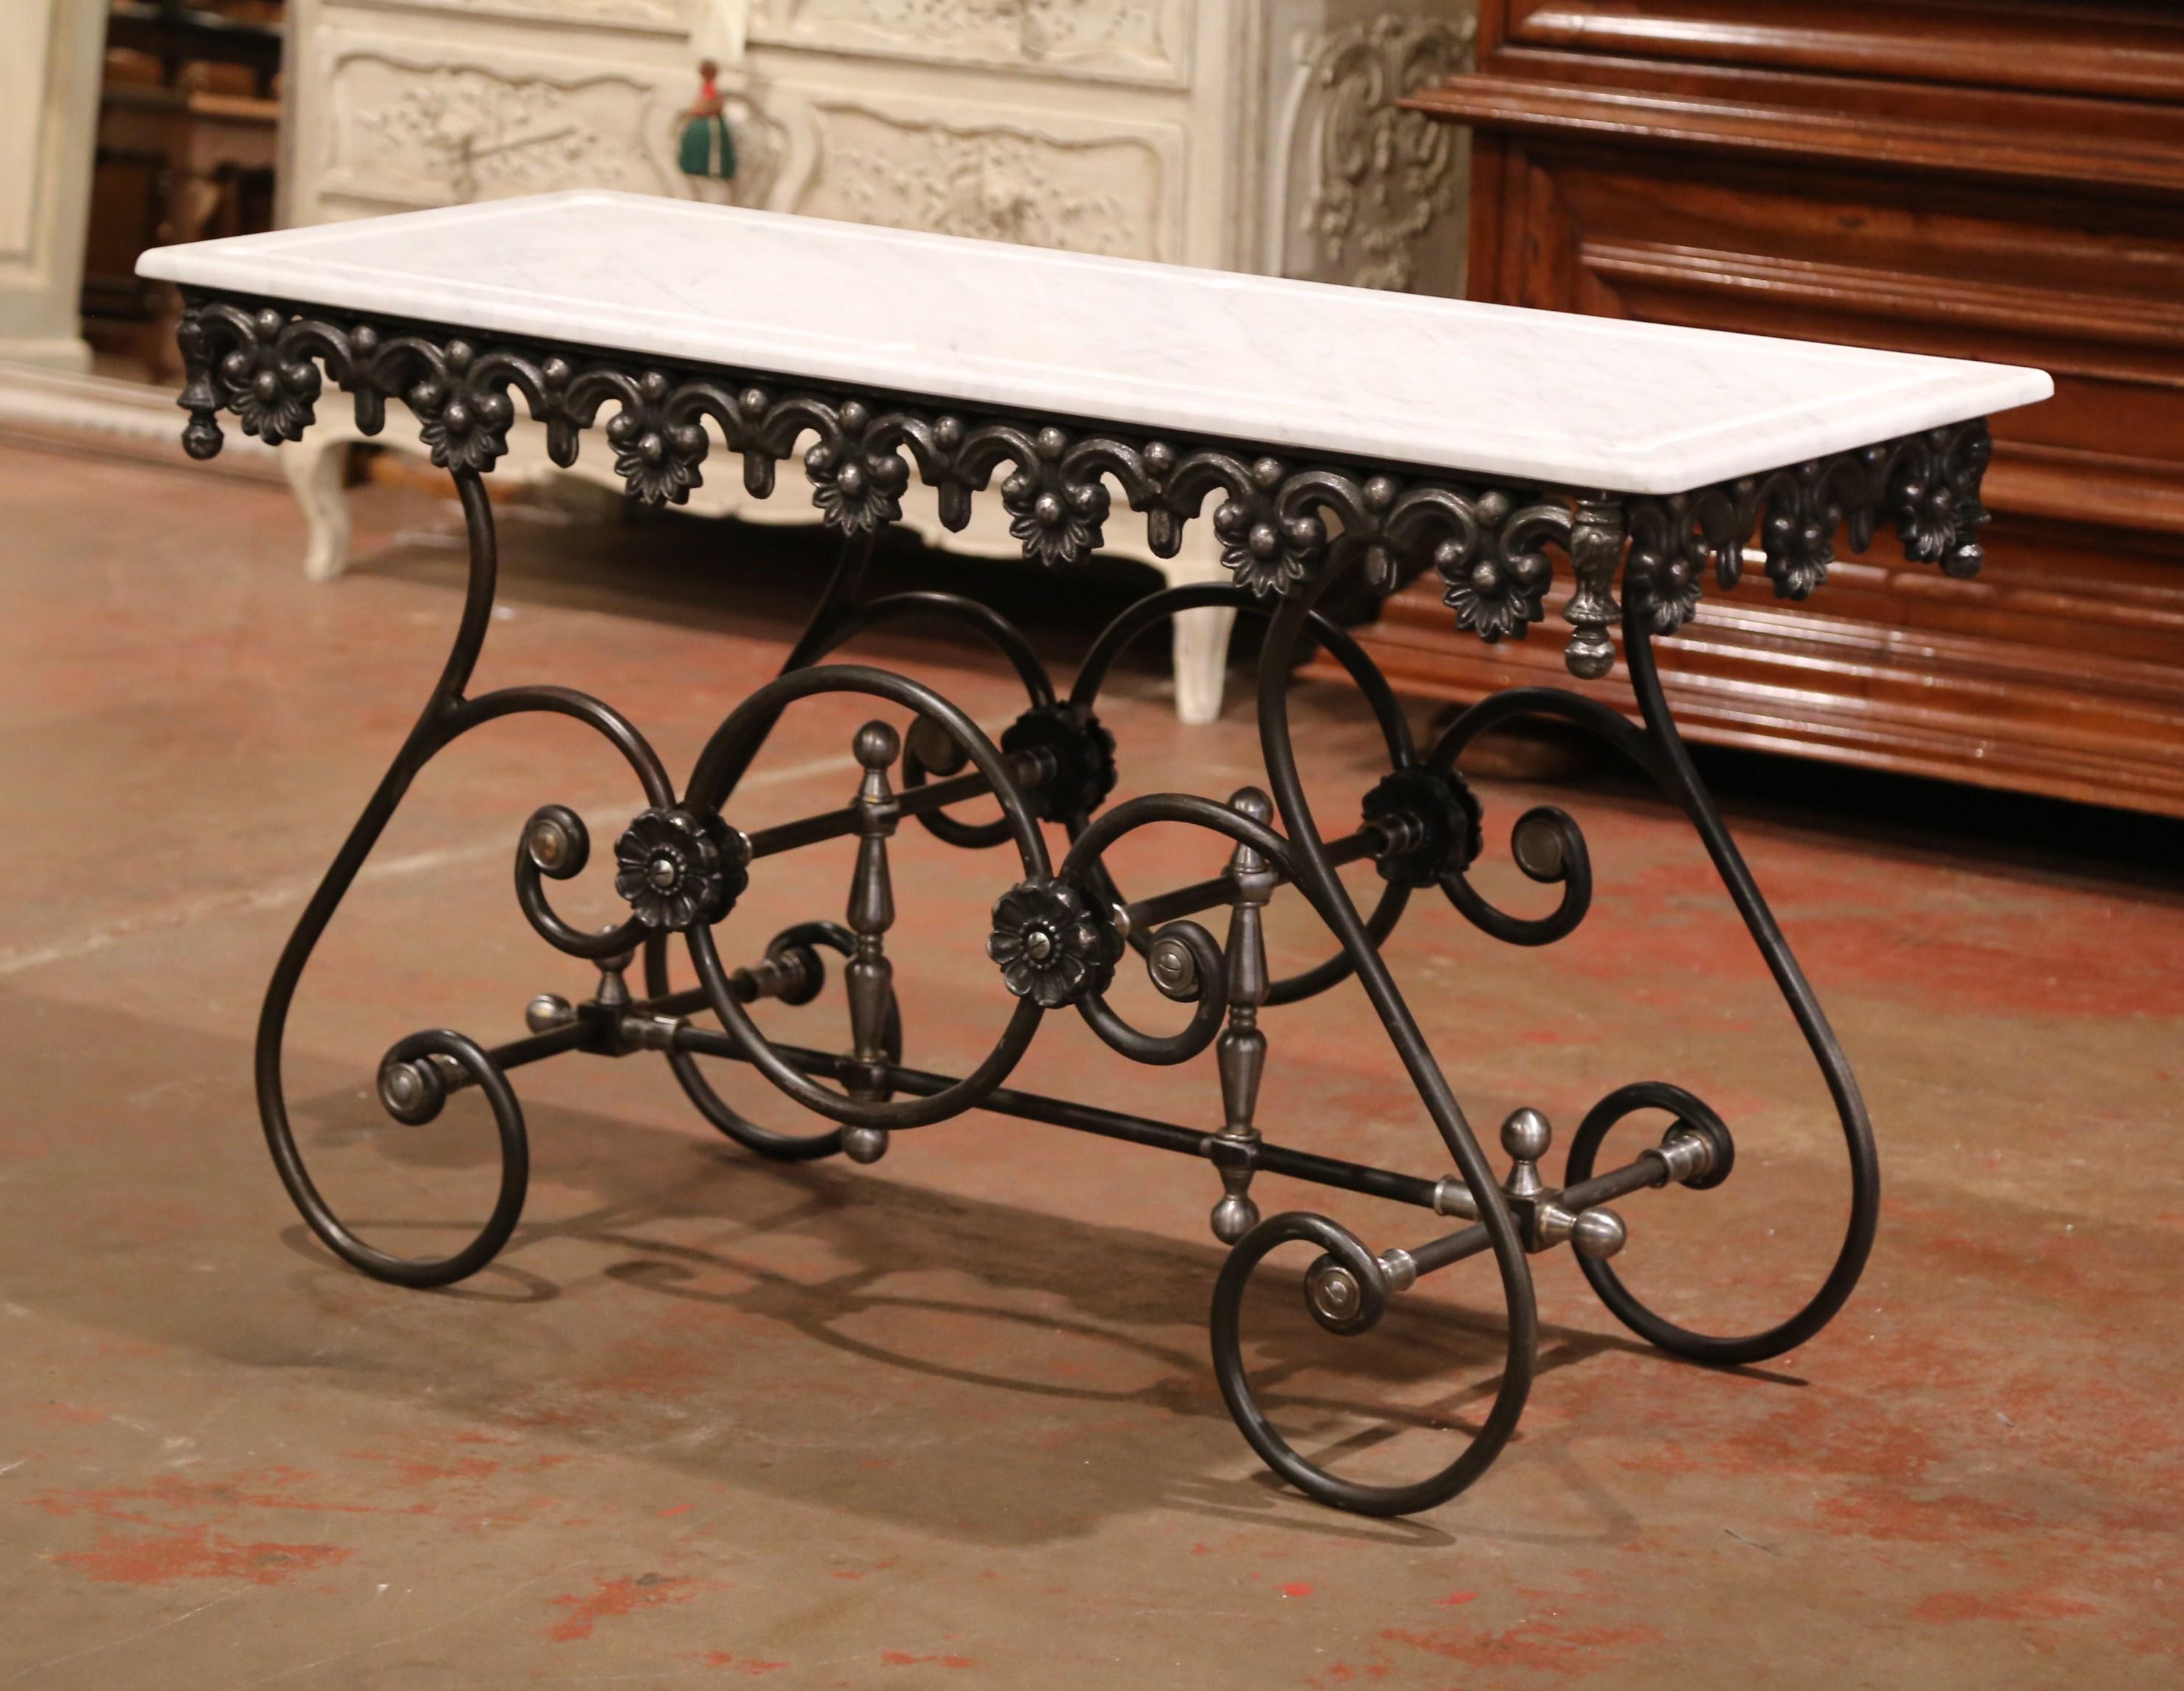 Contemporary Polished Iron Butcher Pastry Table with White Marble Top from France